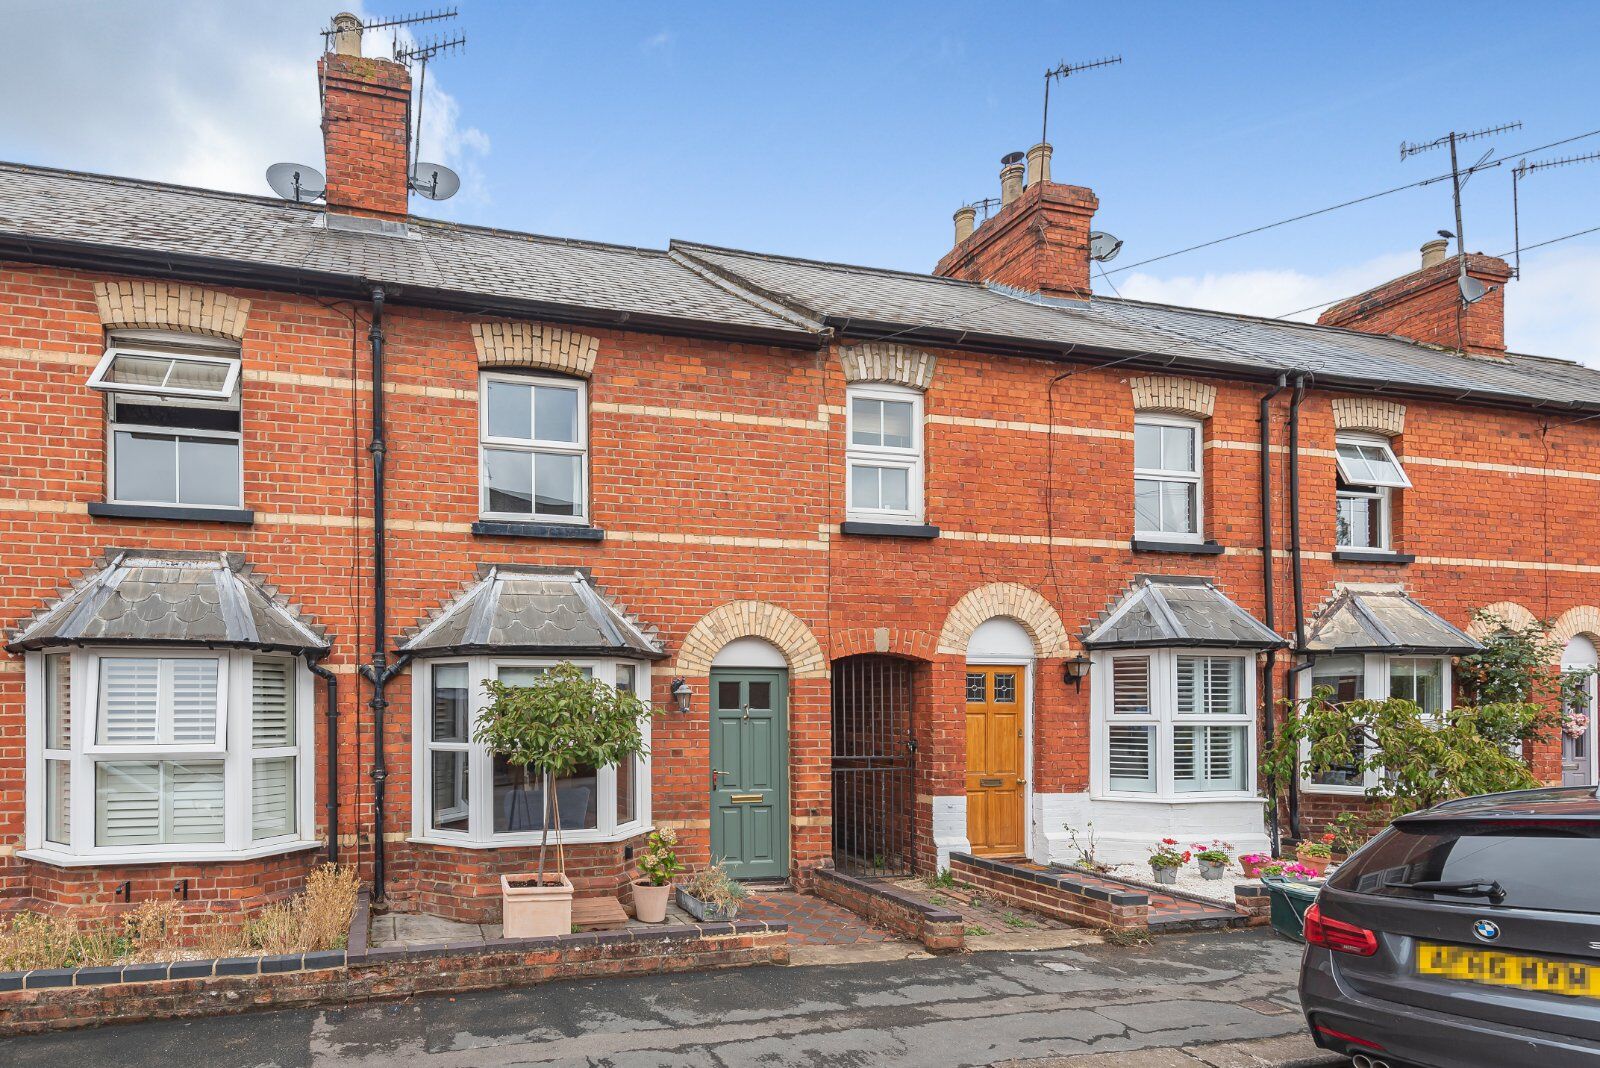 2 bedroom mid terraced house for sale Park Road, Henley-on-Thames, RG9, main image